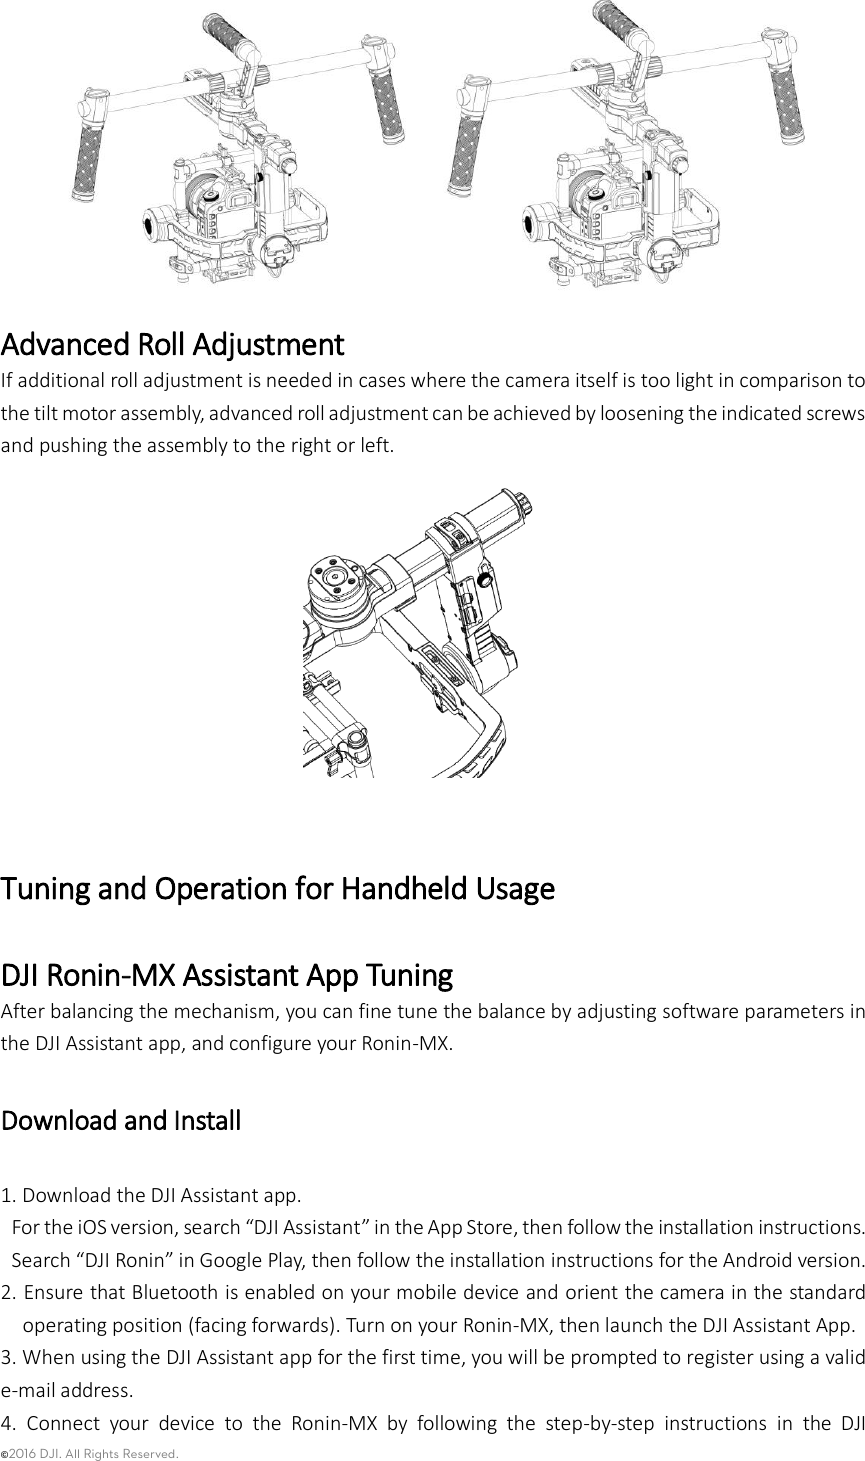 ©2016 DJI. All Rights Reserved.       Advanced Roll Adjustment If additional roll adjustment is needed in cases where the camera itself is too light in comparison to the tilt motor assembly, advanced roll adjustment can be achieved by loosening the indicated screws and pushing the assembly to the right or left.   Tuning and Operation for Handheld Usage   DJI Ronin-MX Assistant App Tuning   After balancing the mechanism, you can fine tune the balance by adjusting software parameters in the DJI Assistant app, and configure your Ronin-MX.   Download and Install   1. Download the DJI Assistant app.   For the iOS version, search “DJI Assistant” in the App Store, then follow the installation instructions.   Search “DJI Ronin” in Google Play, then follow the installation instructions for the Android version. 2. Ensure that Bluetooth is enabled on your mobile device and orient the camera in the standard operating position (facing forwards). Turn on your Ronin-MX, then launch the DJI Assistant App. 3. When using the DJI Assistant app for the first time, you will be prompted to register using a valid e-mail address.   4.  Connect  your  device  to  the  Ronin-MX  by  following  the  step-by-step  instructions  in  the  DJI 